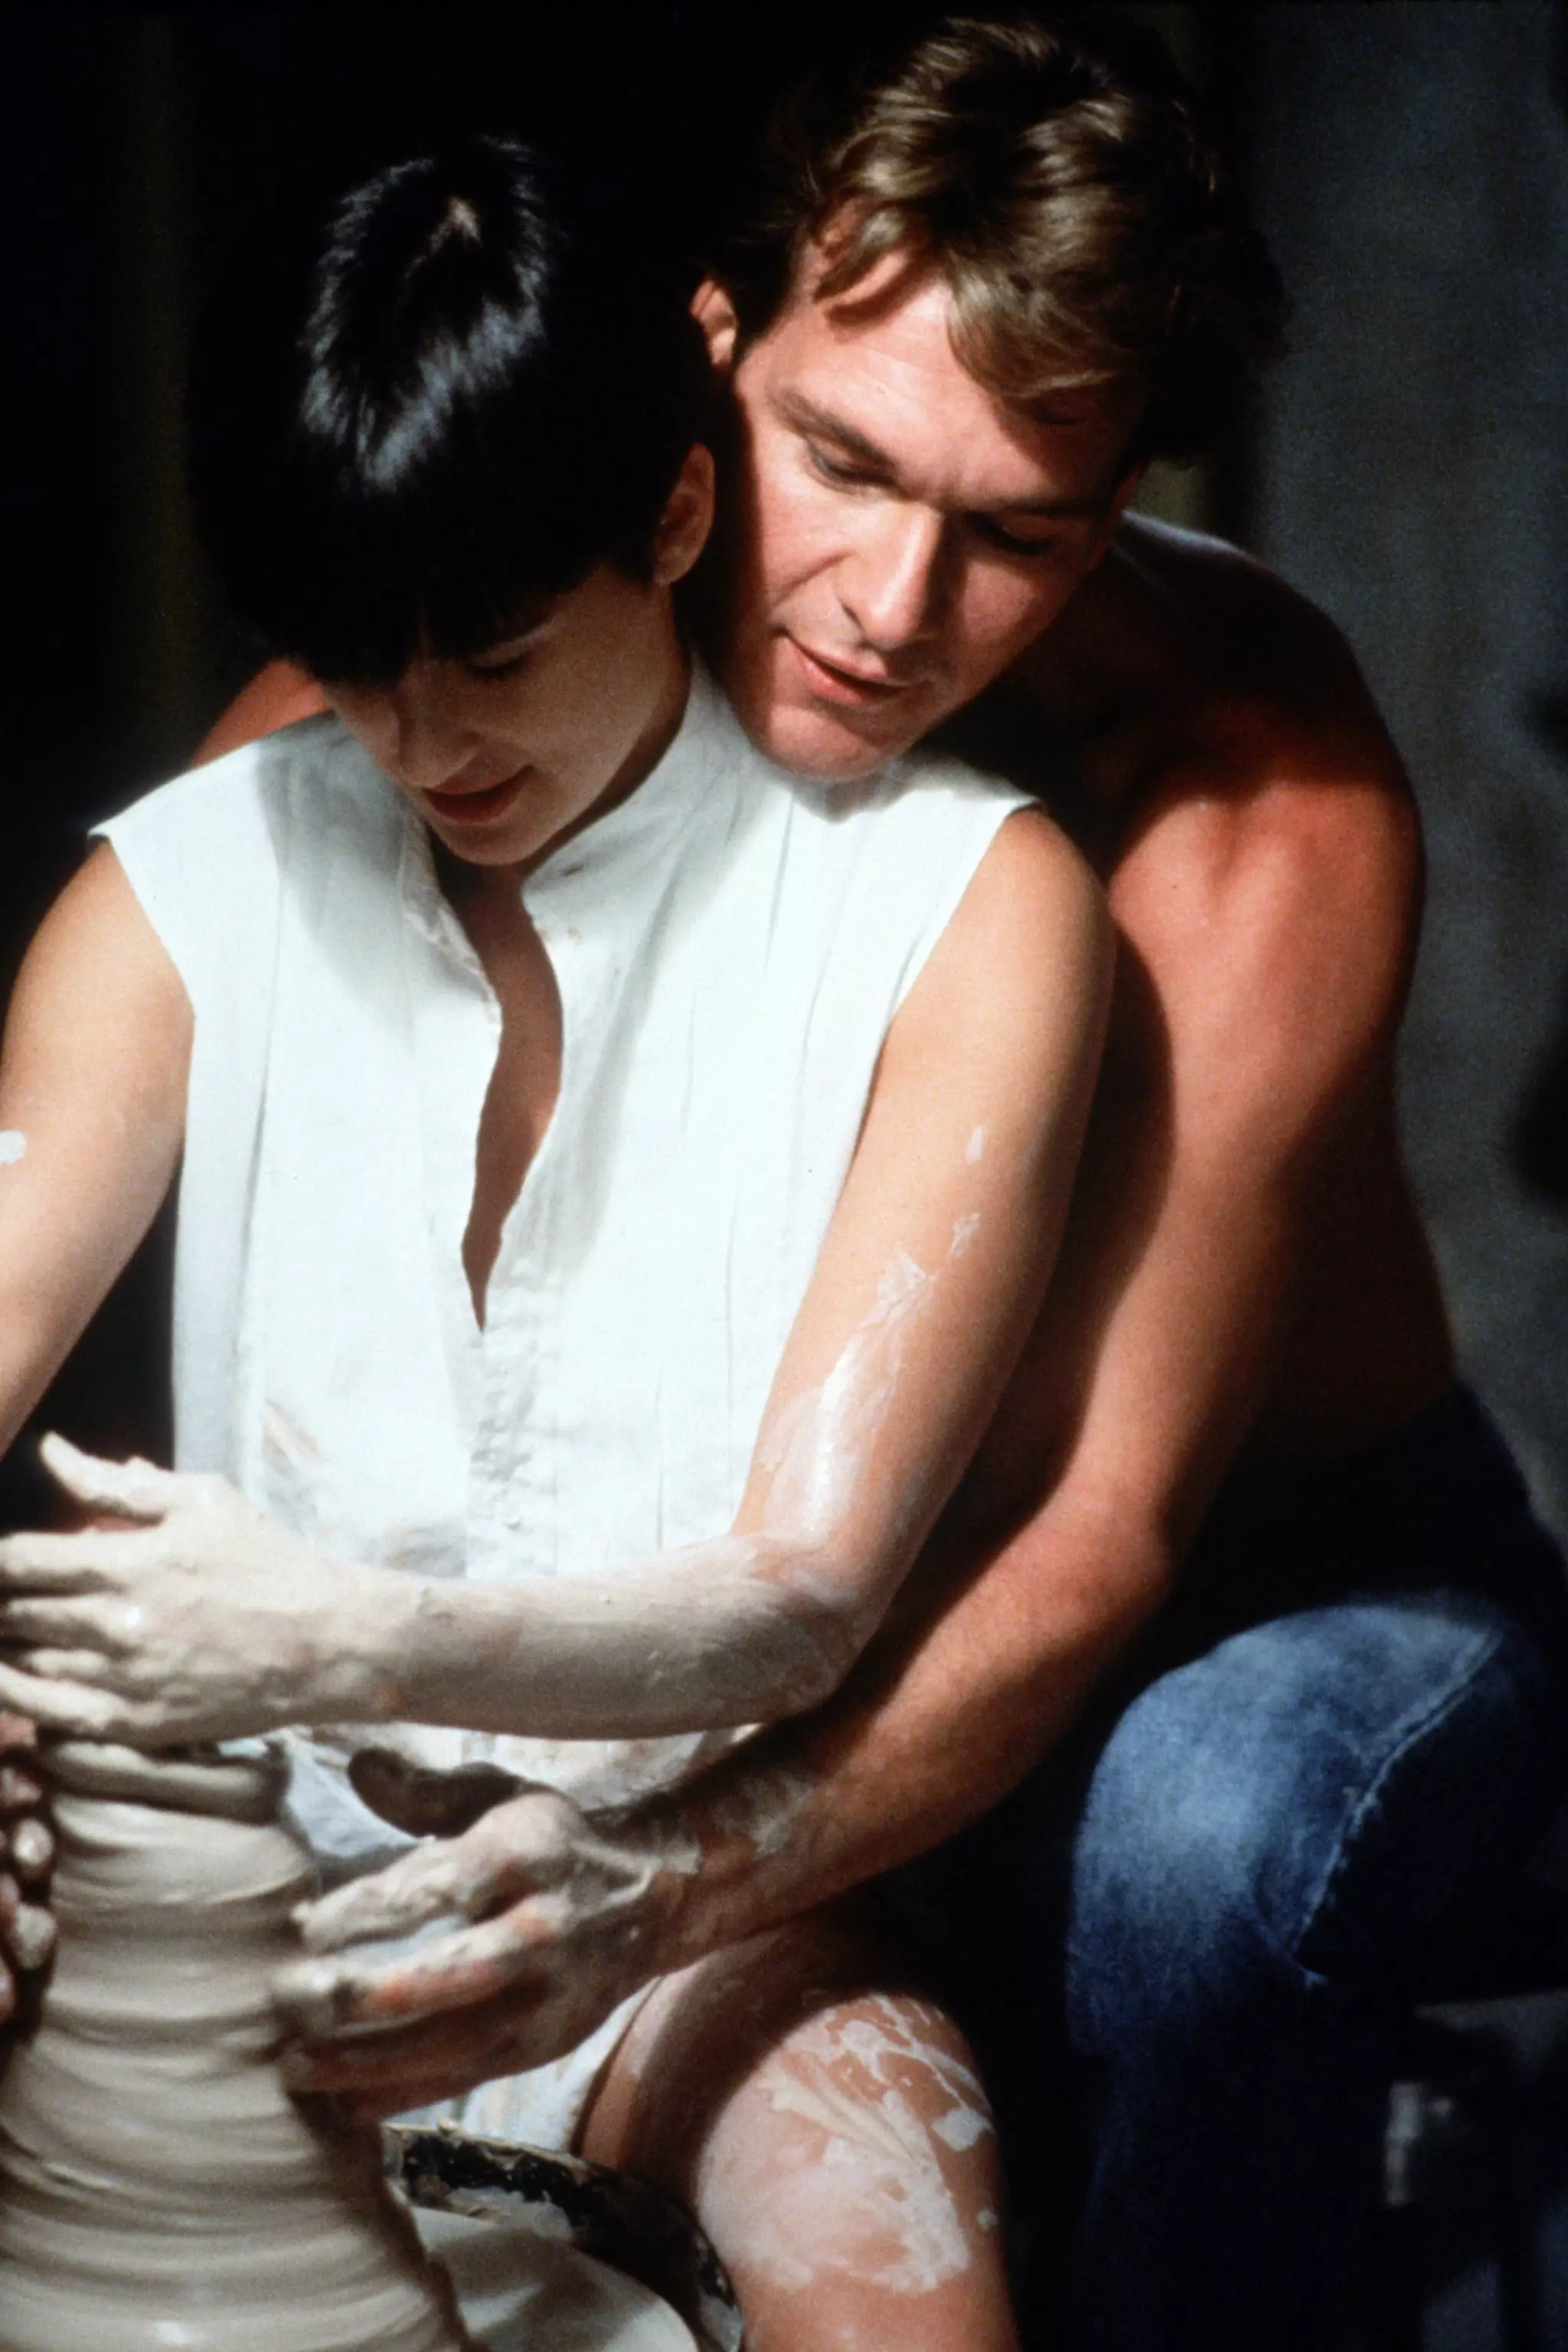 The 'Ghost' pottery scene is one of the most iconic in cinema (